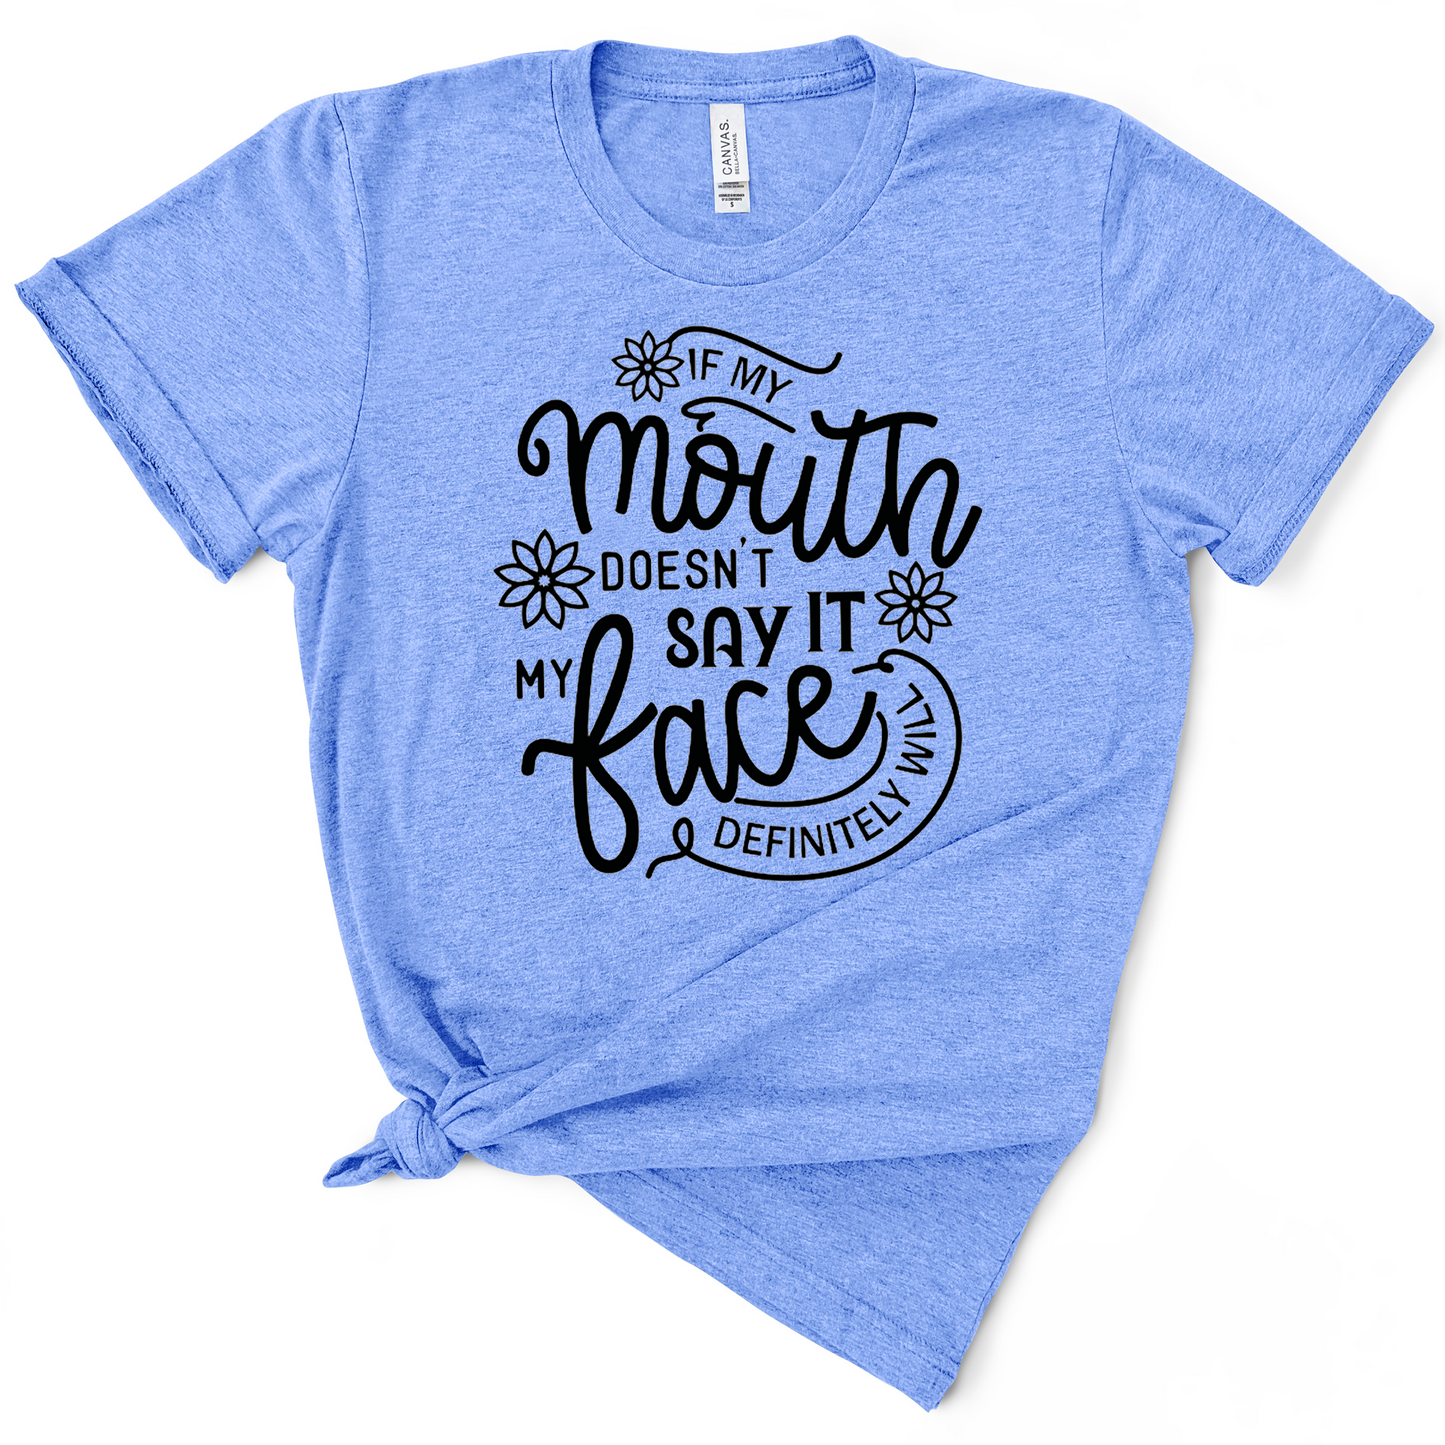 If My Mouth Doesn't Say It My Face Definitely Will TShirt